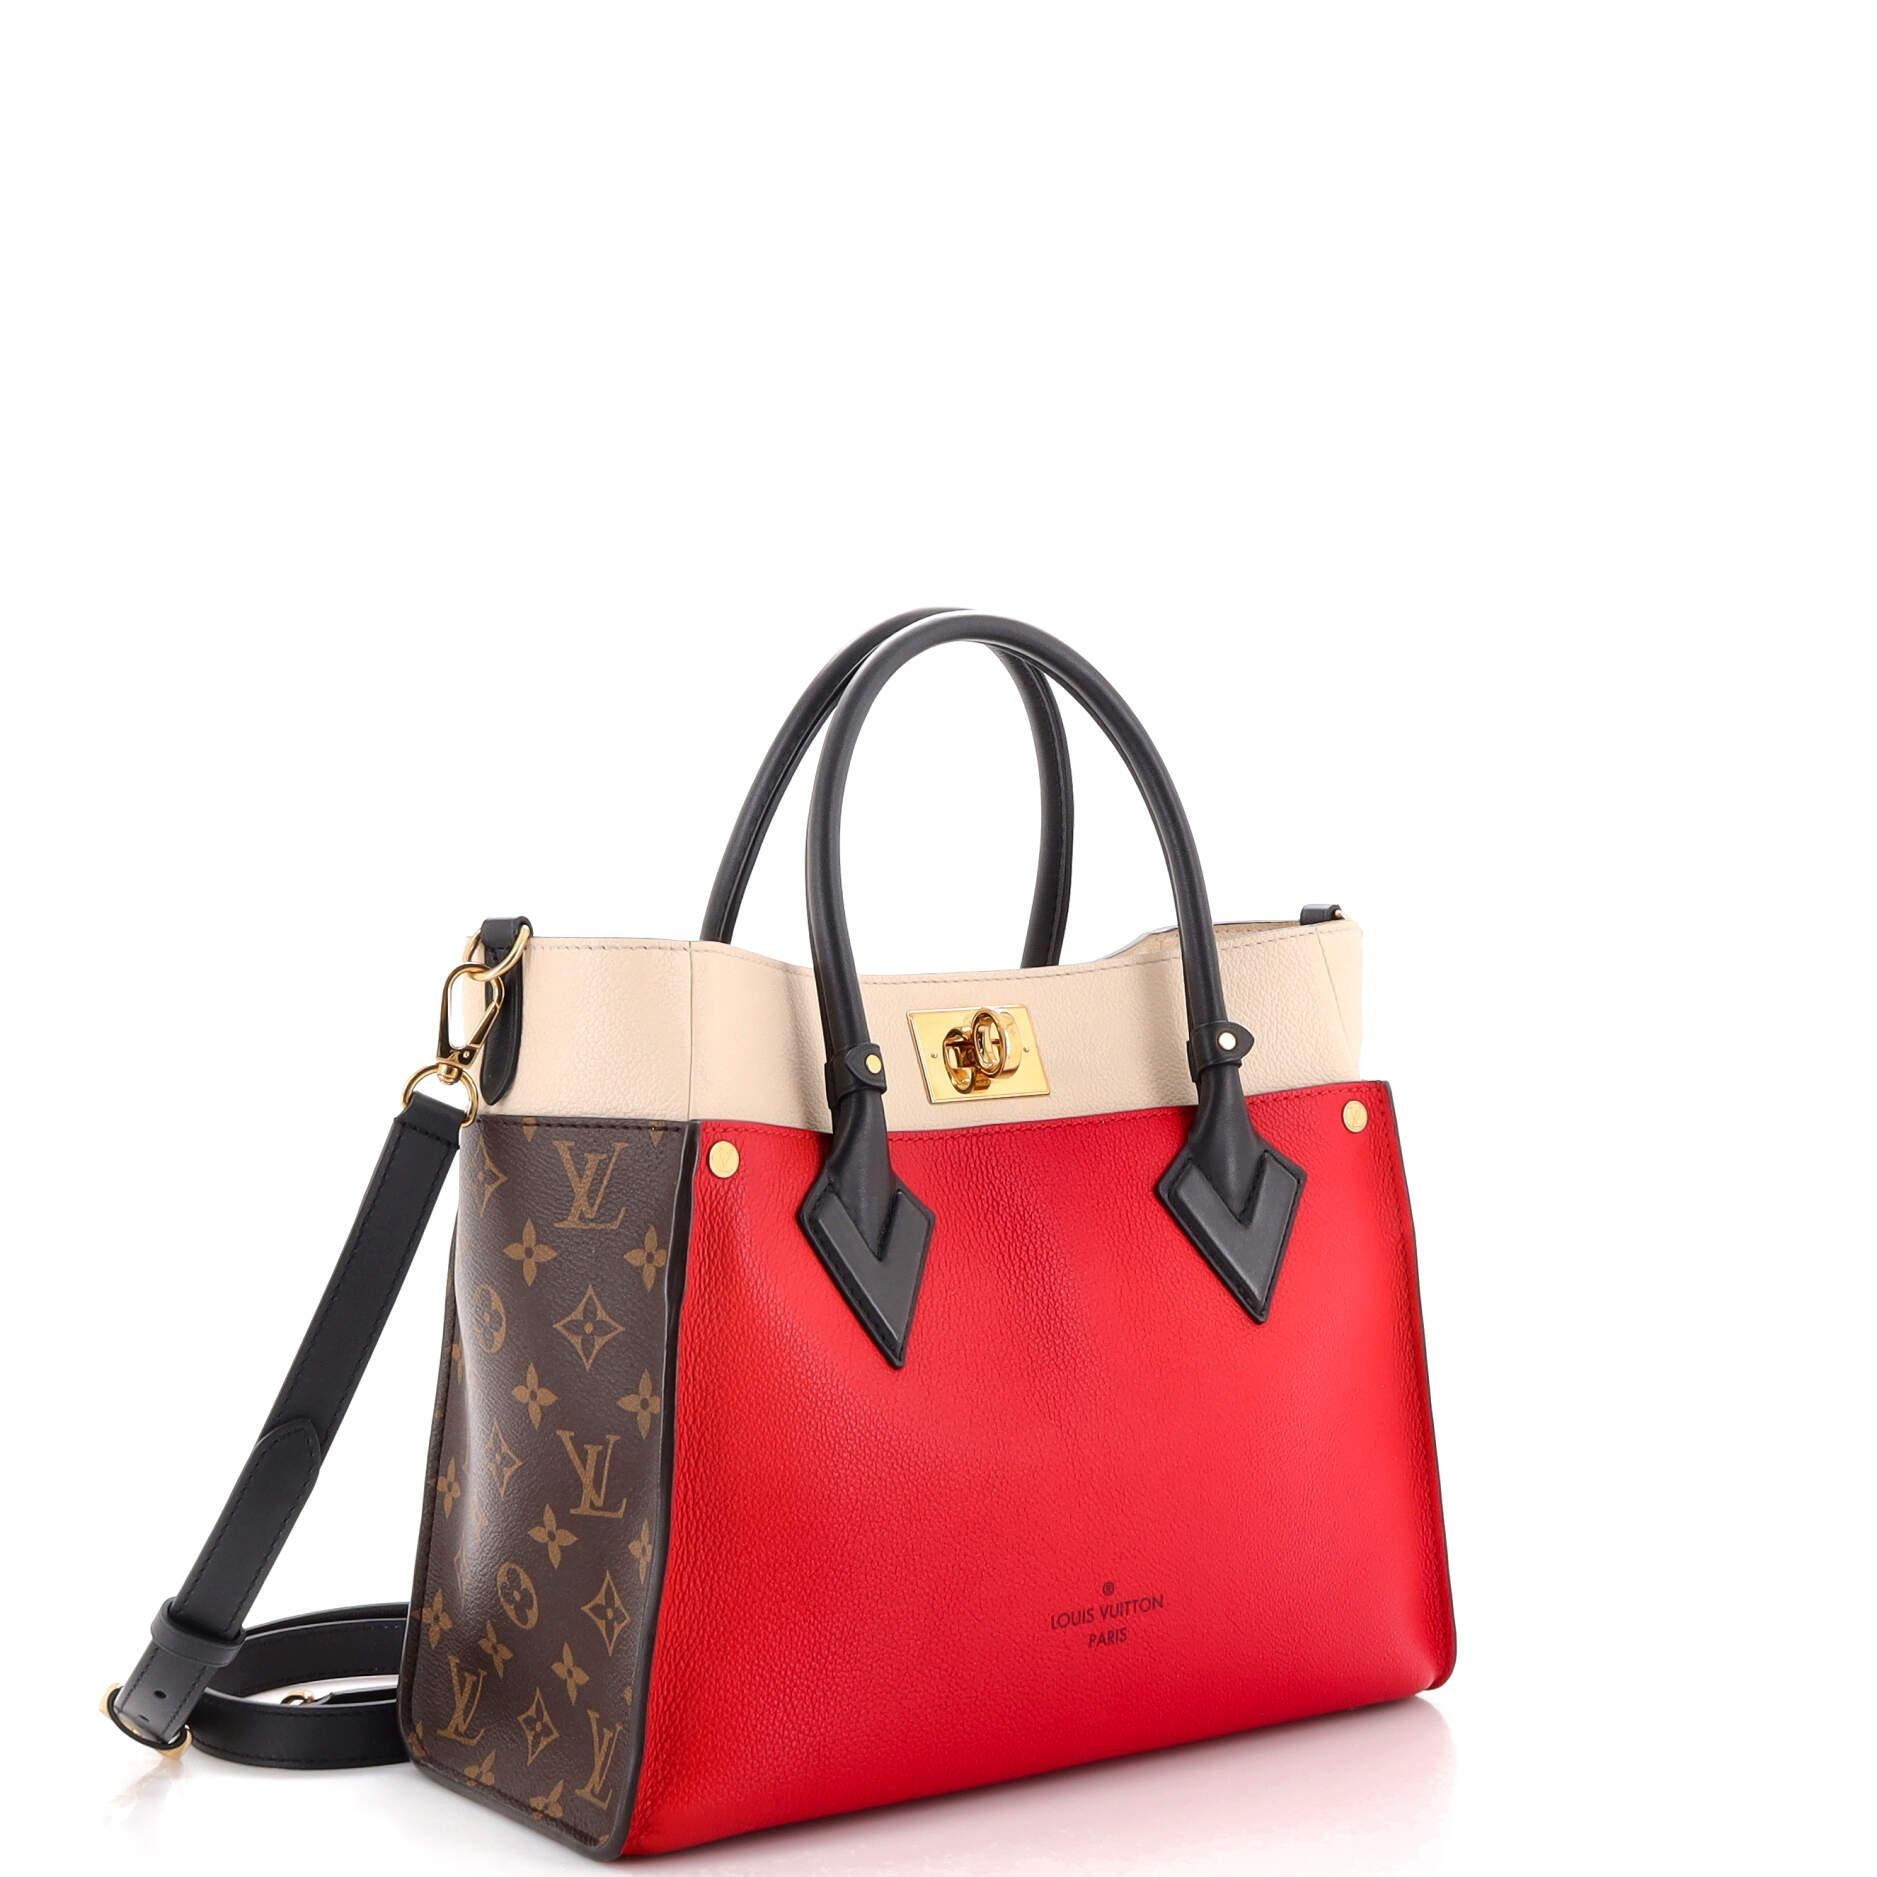 On My Side MM High End Leathers - Women - Handbags